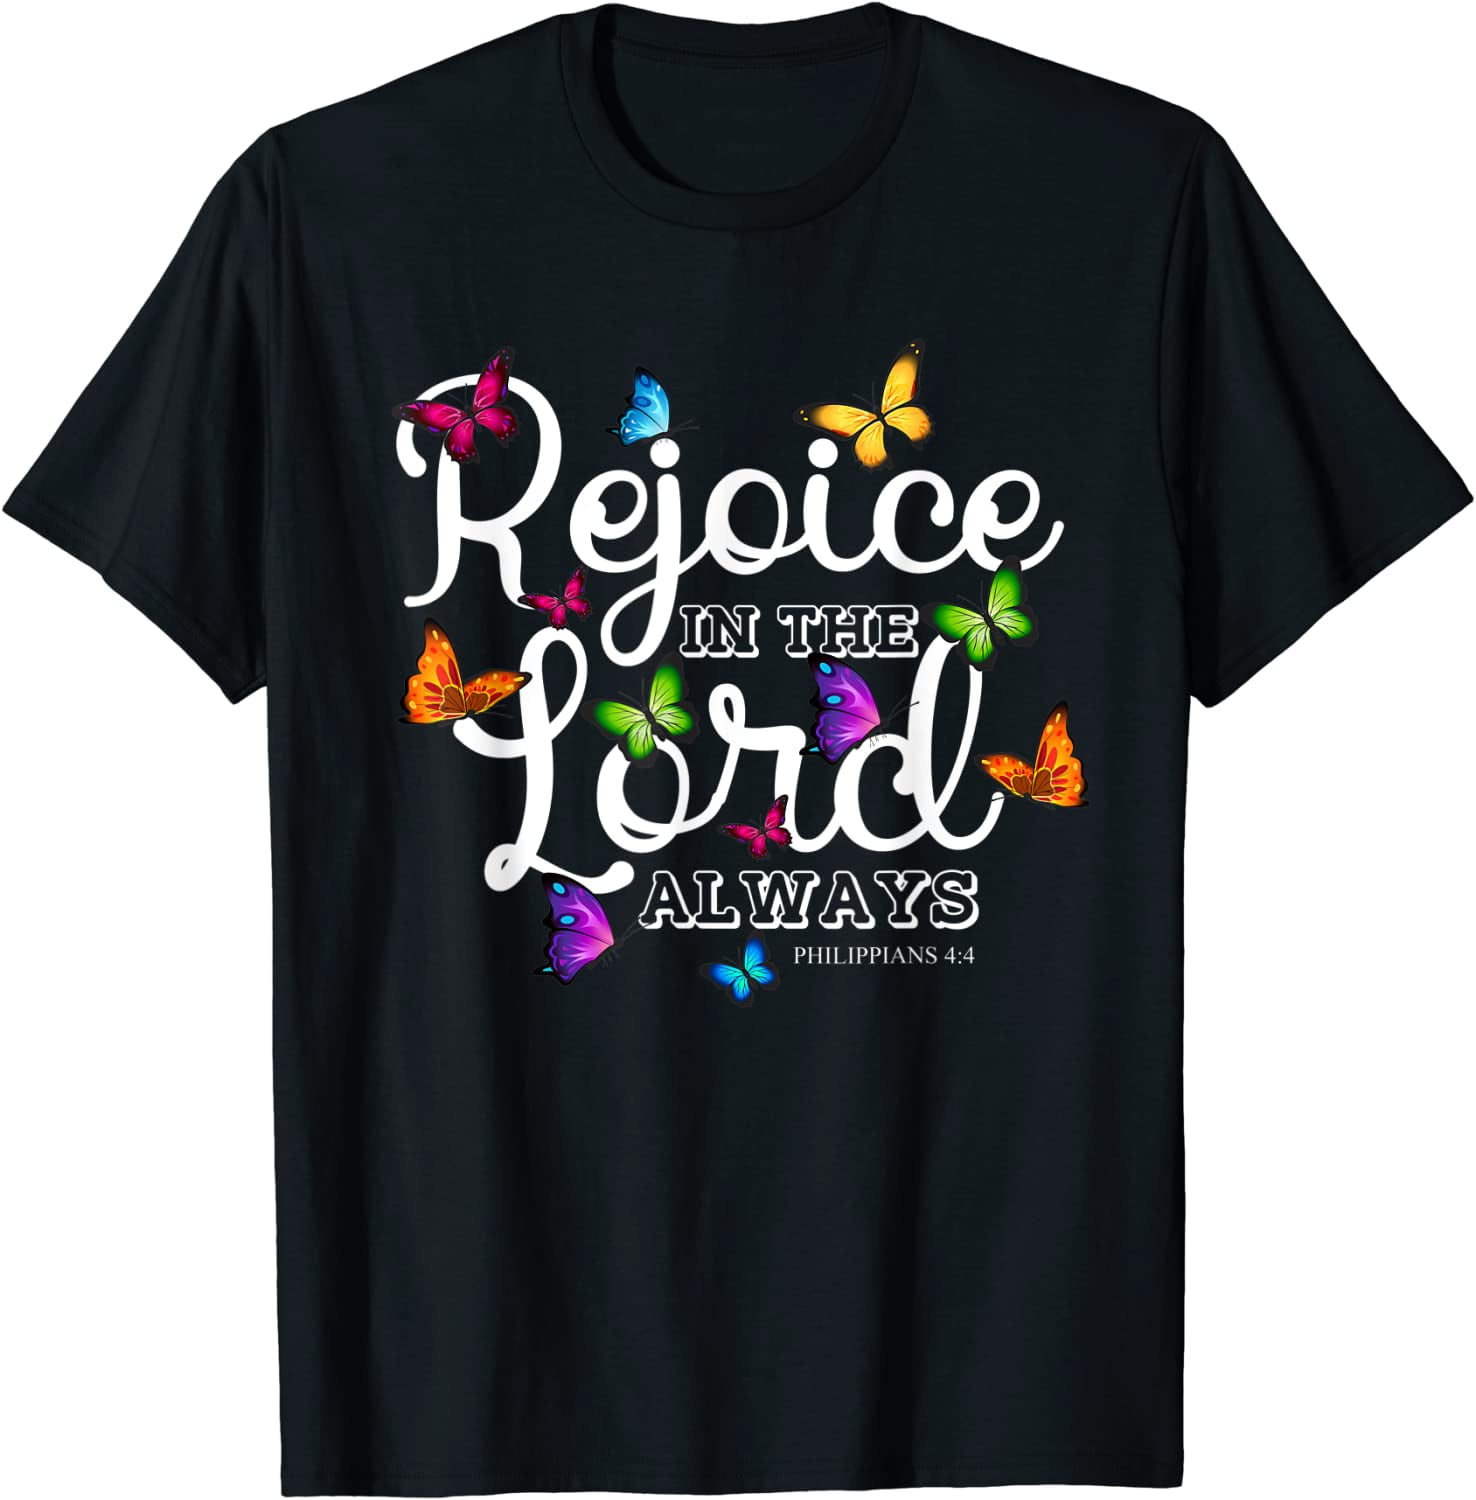 Rejoice In The Lord Always Philippians 4:4 Bible Verse Christian Jesus ...